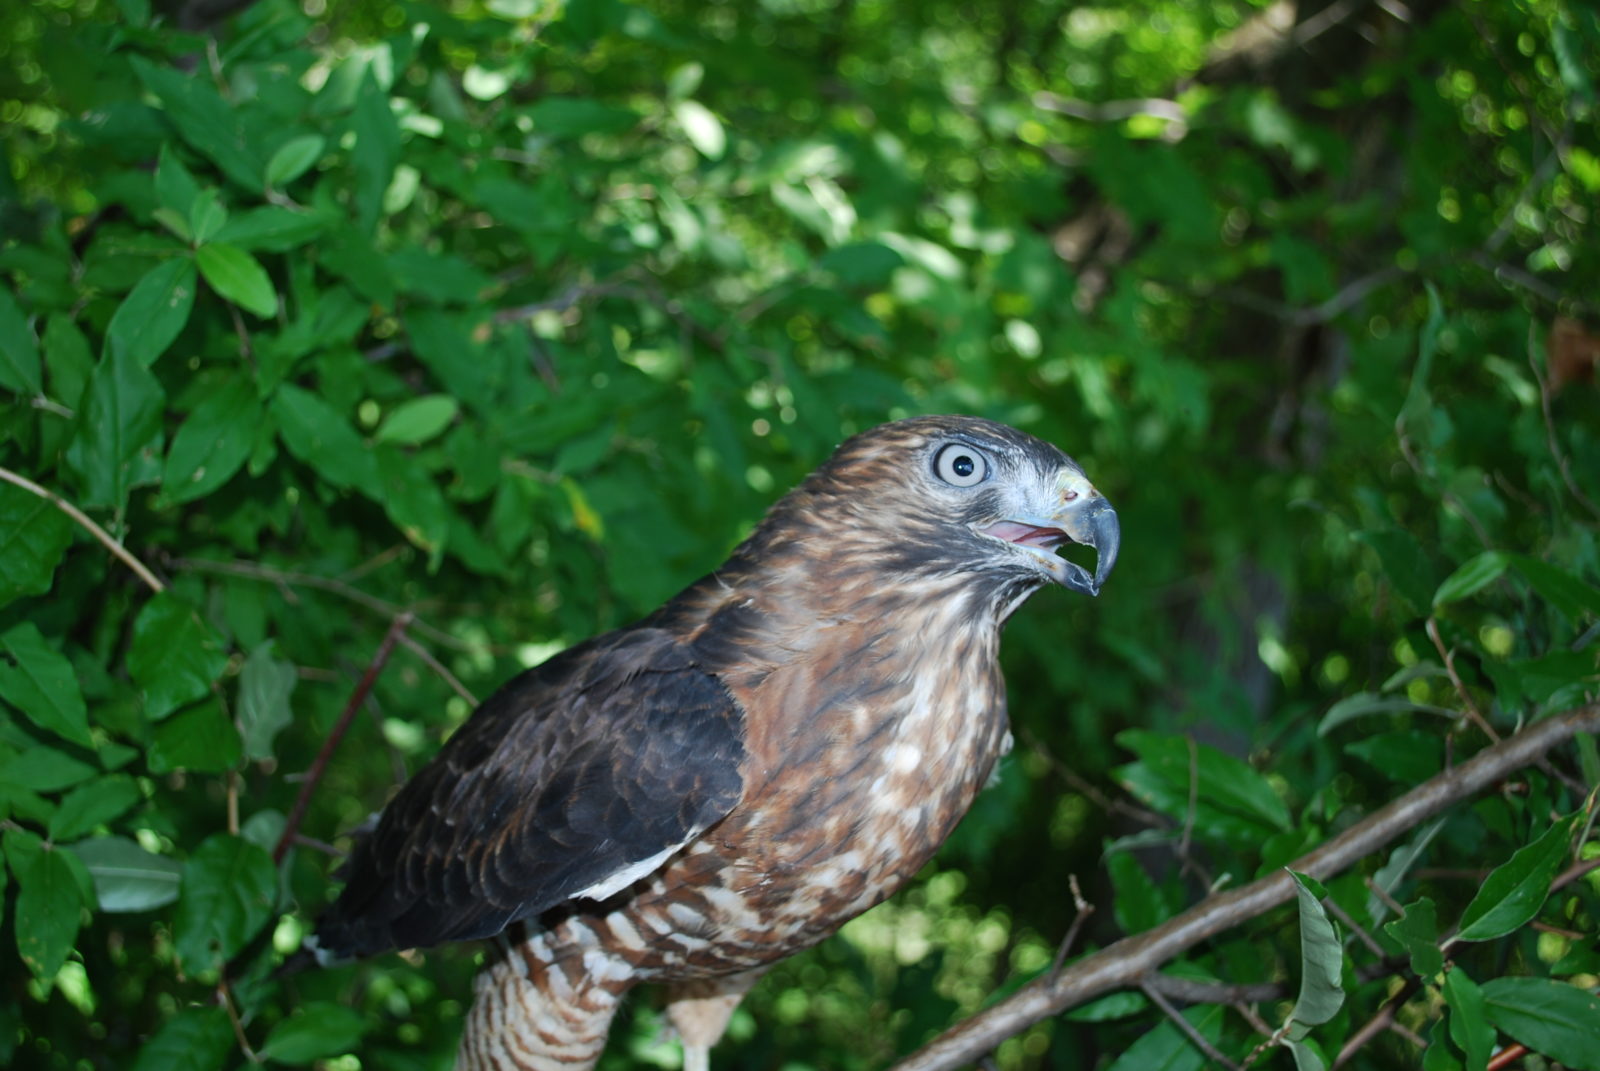 A image of a broad winged raptor sitting in a creeper thicket